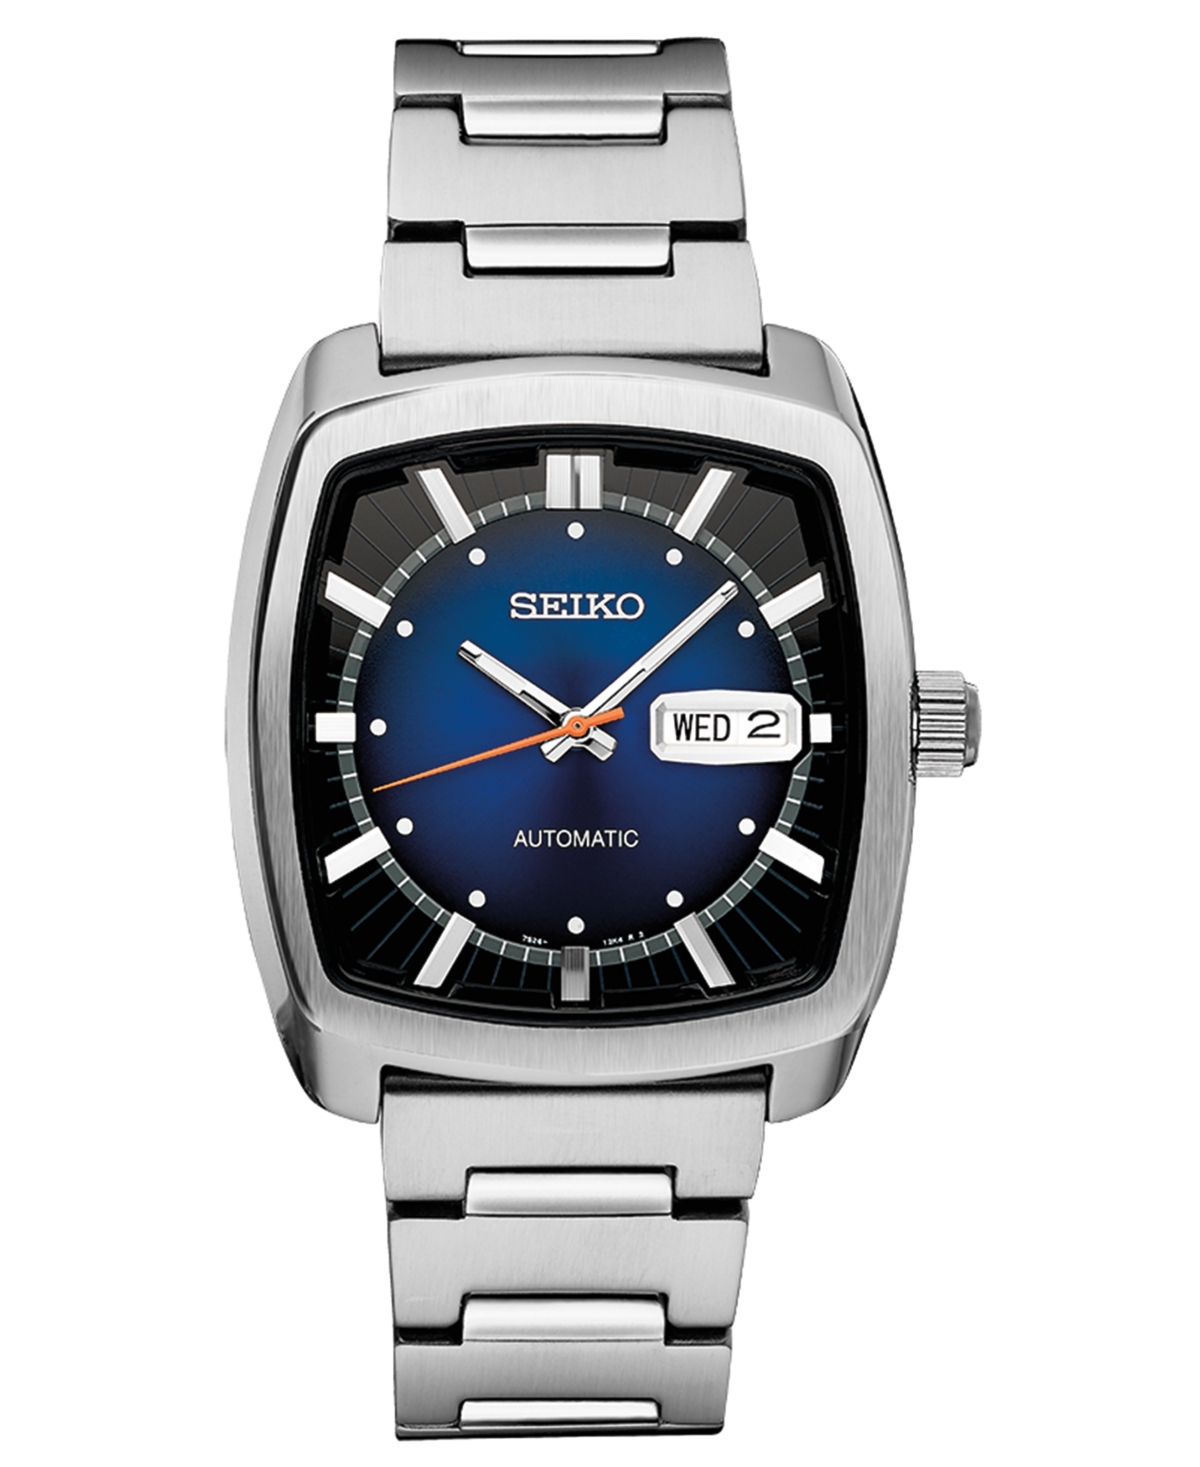 Seiko Men's Automatic Recraft Series Stainless Steel Bracelet Watch 40mm &  Reviews - All Watches - Jewelry & Watches - Macy's